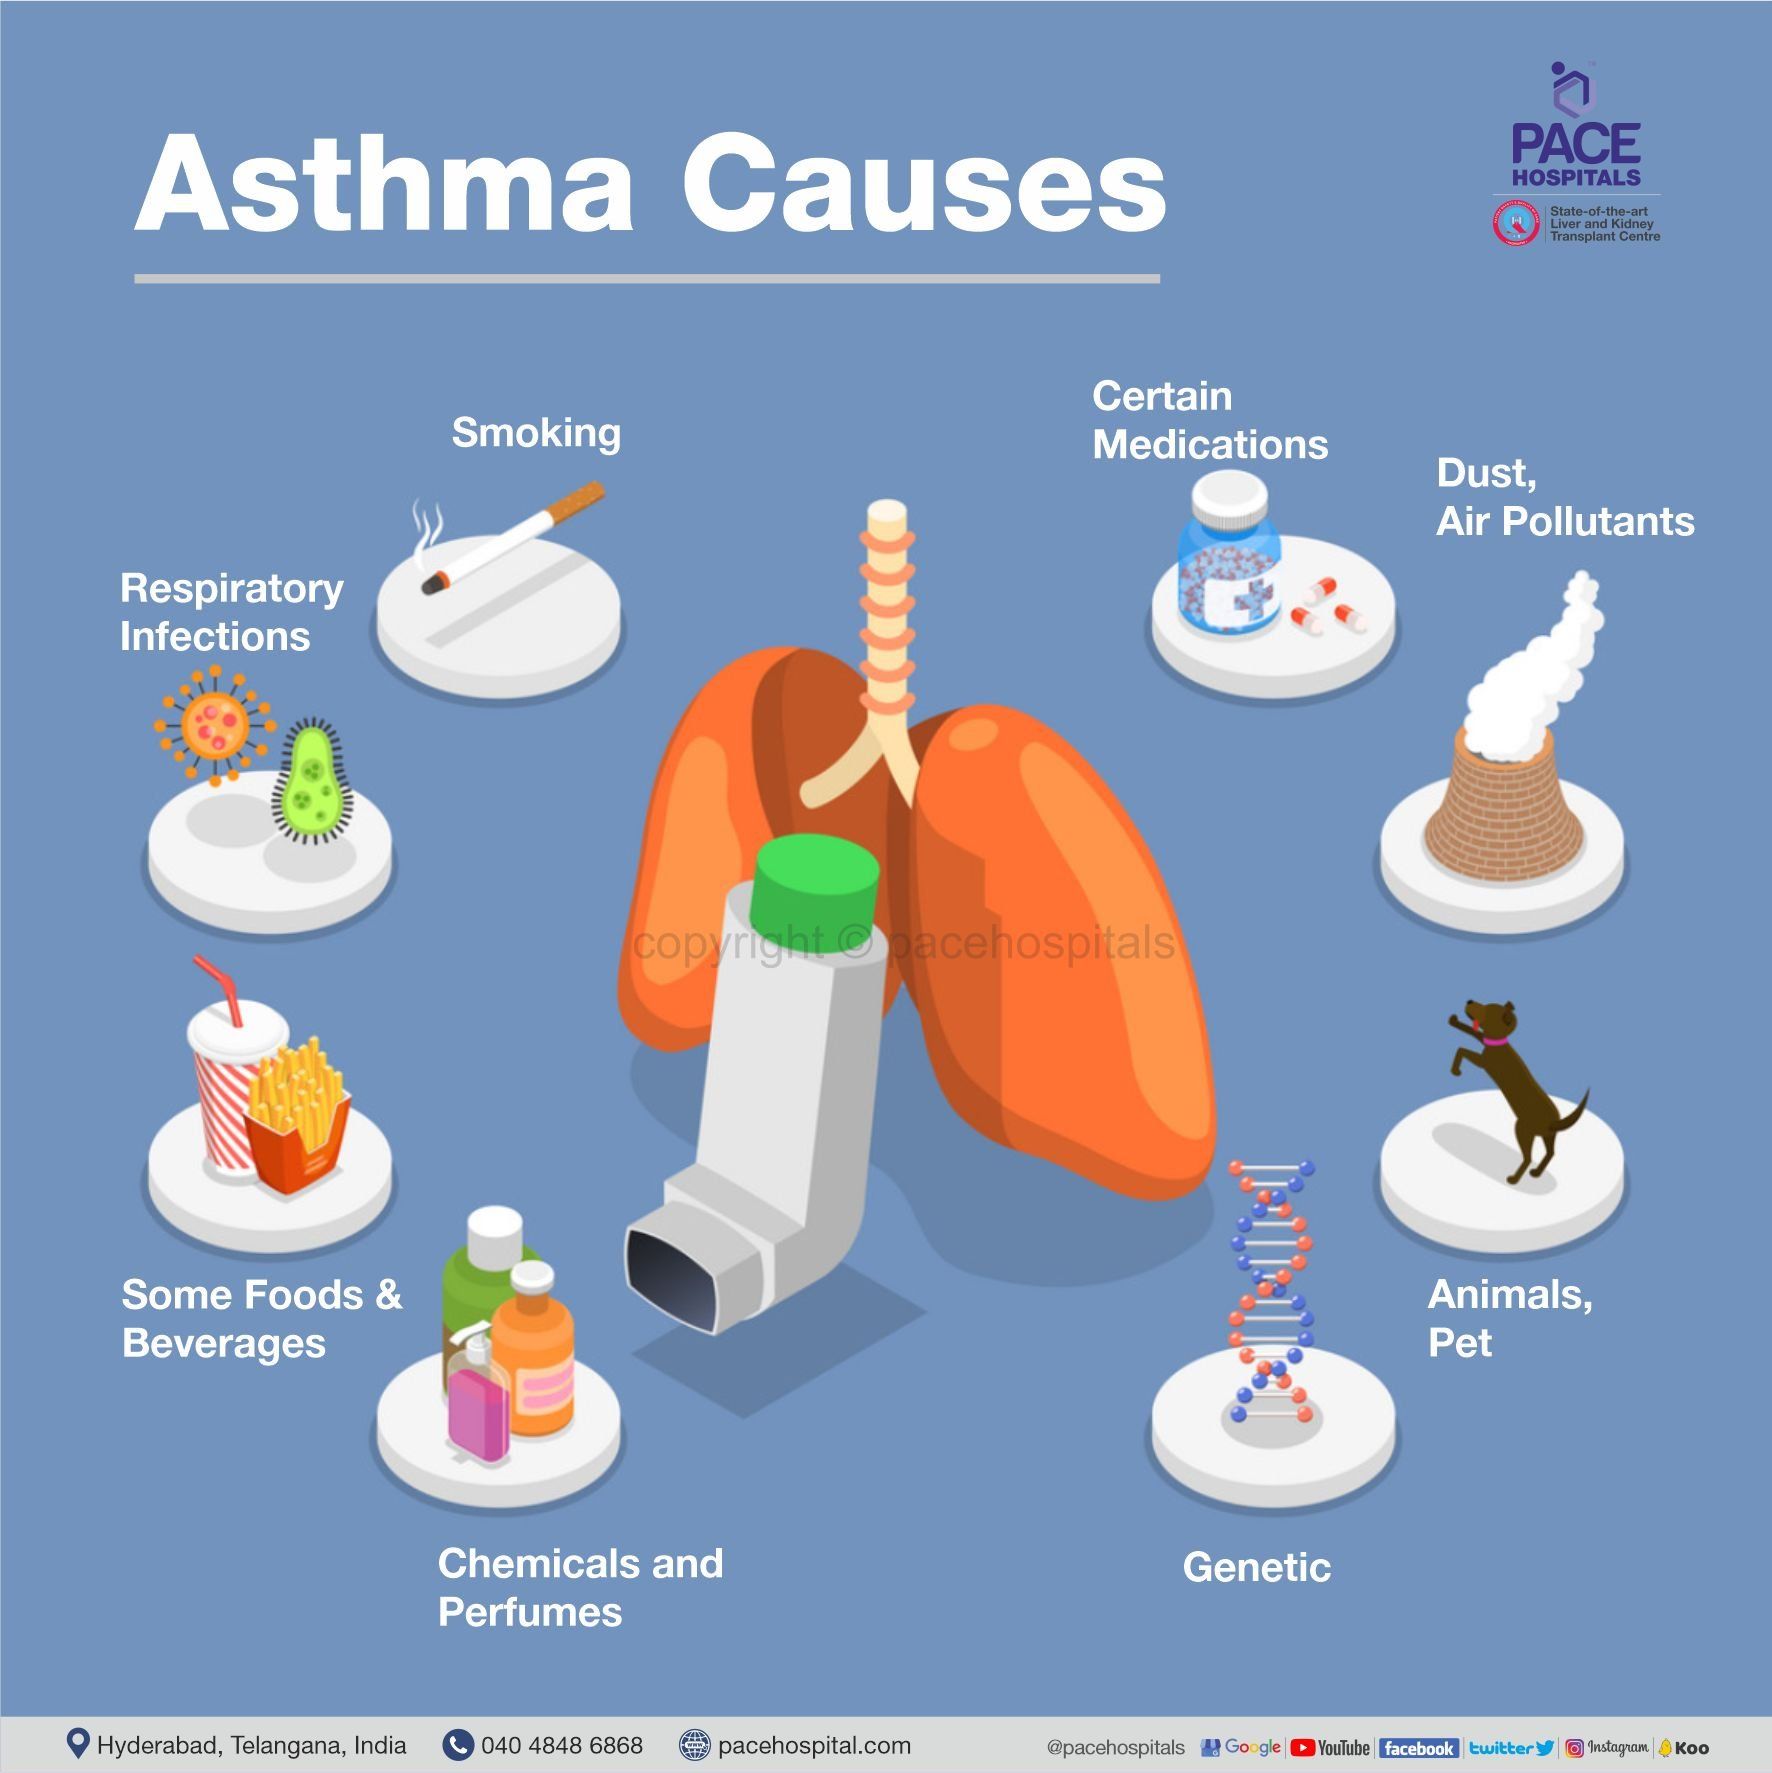 Asthma causes, causes of bronchial asthma